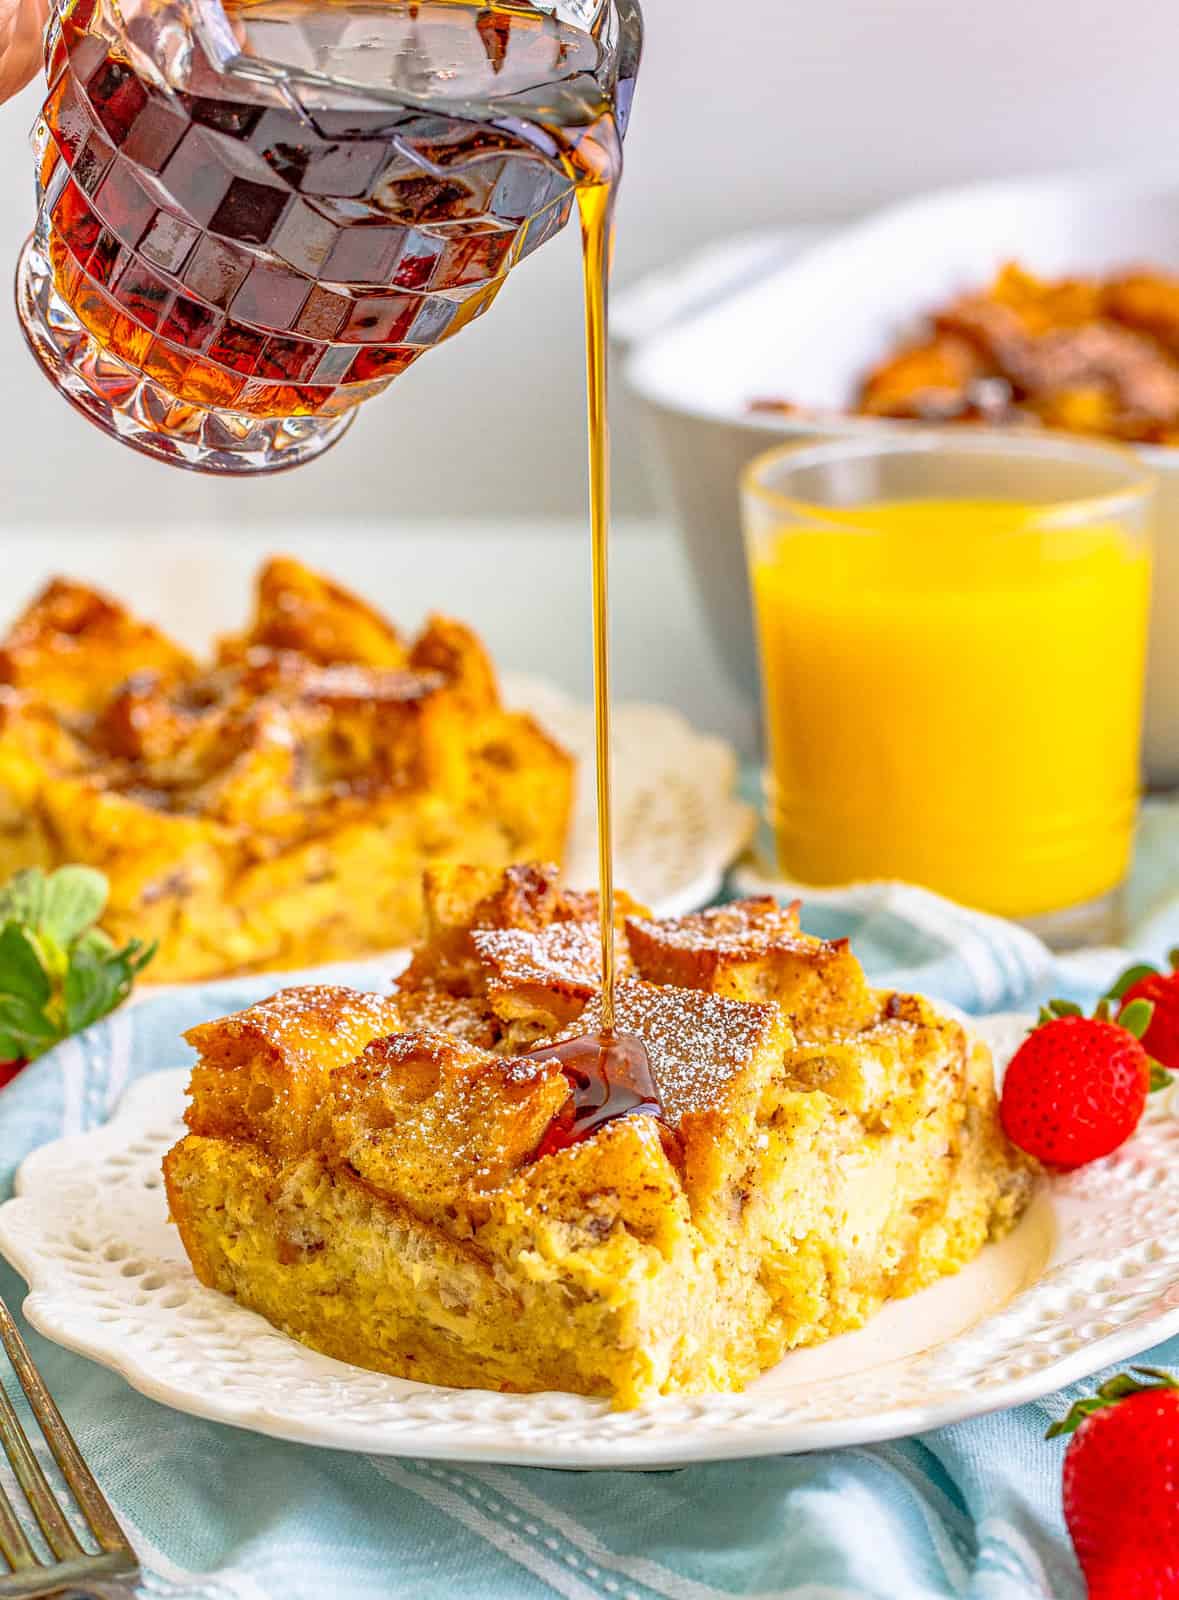 Syrup being poured over a slice of French Toast Casserole.